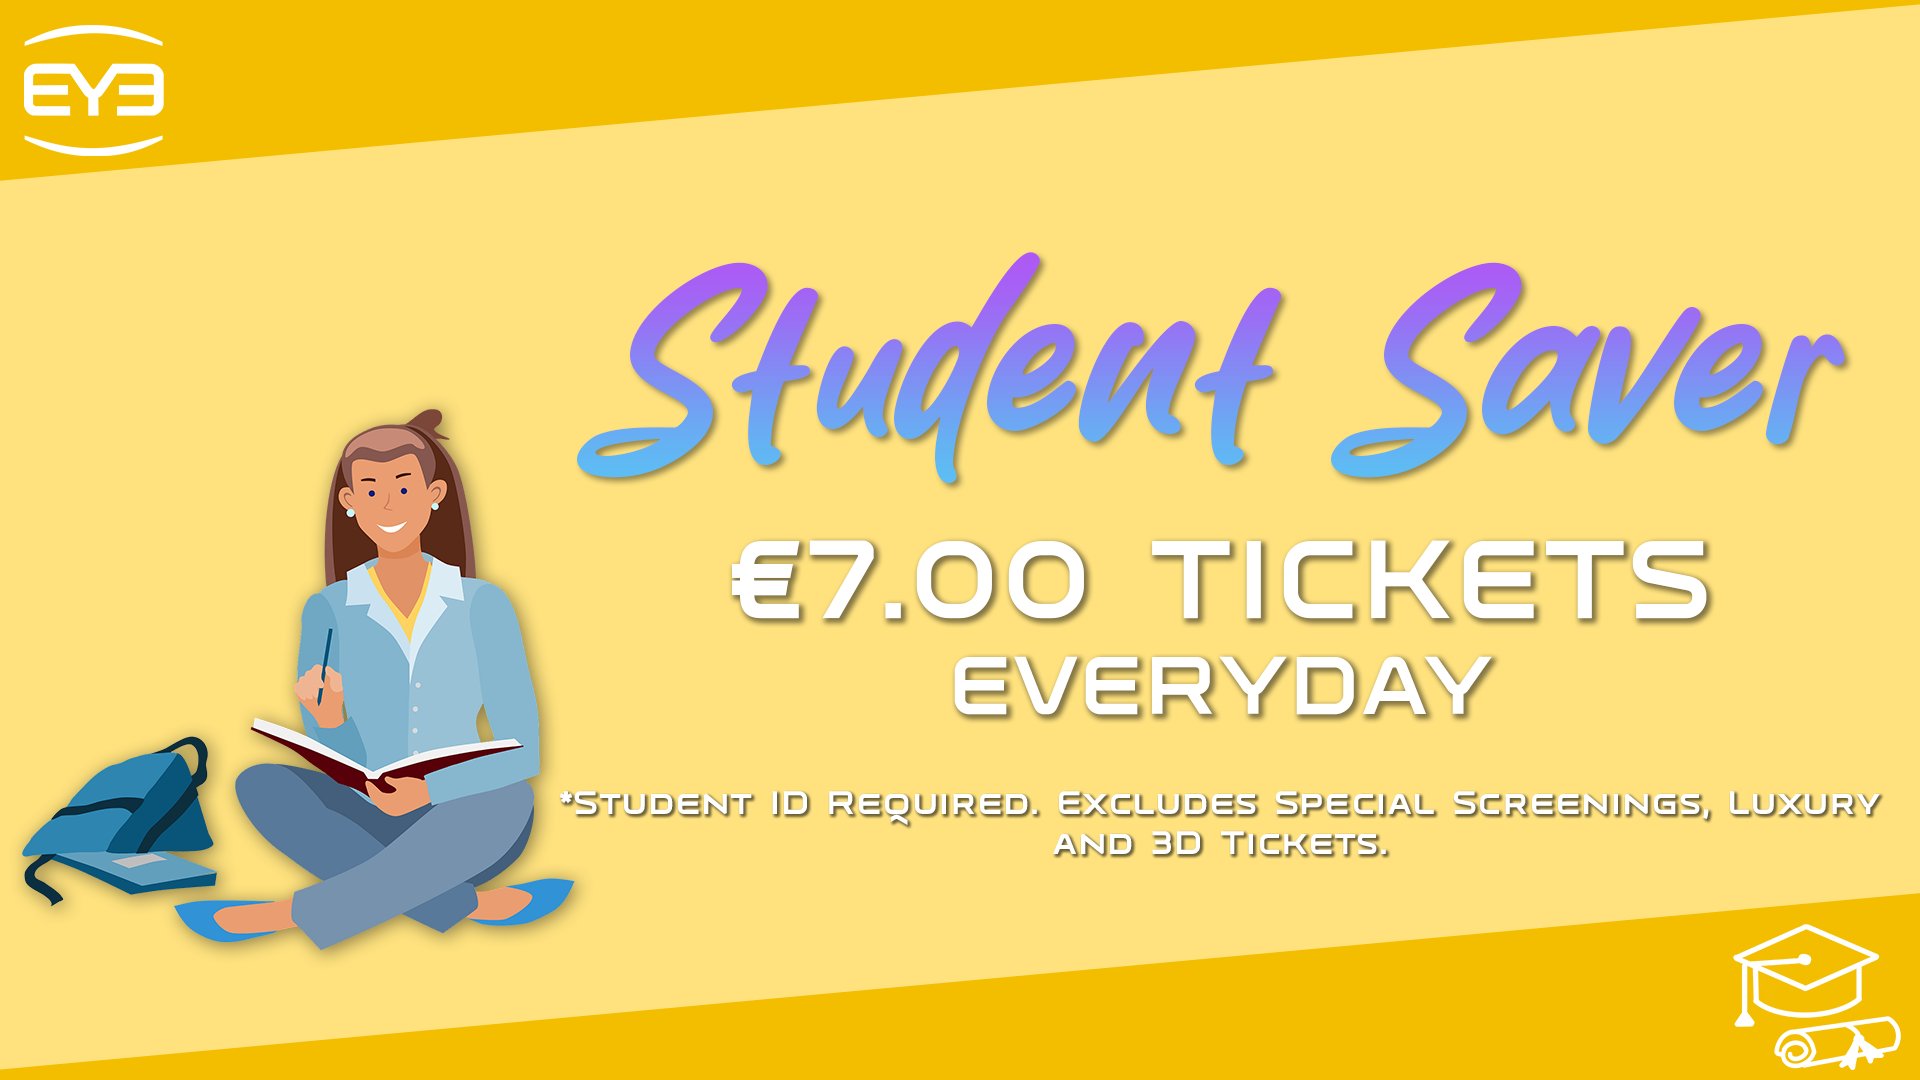 Every Day Student Deal